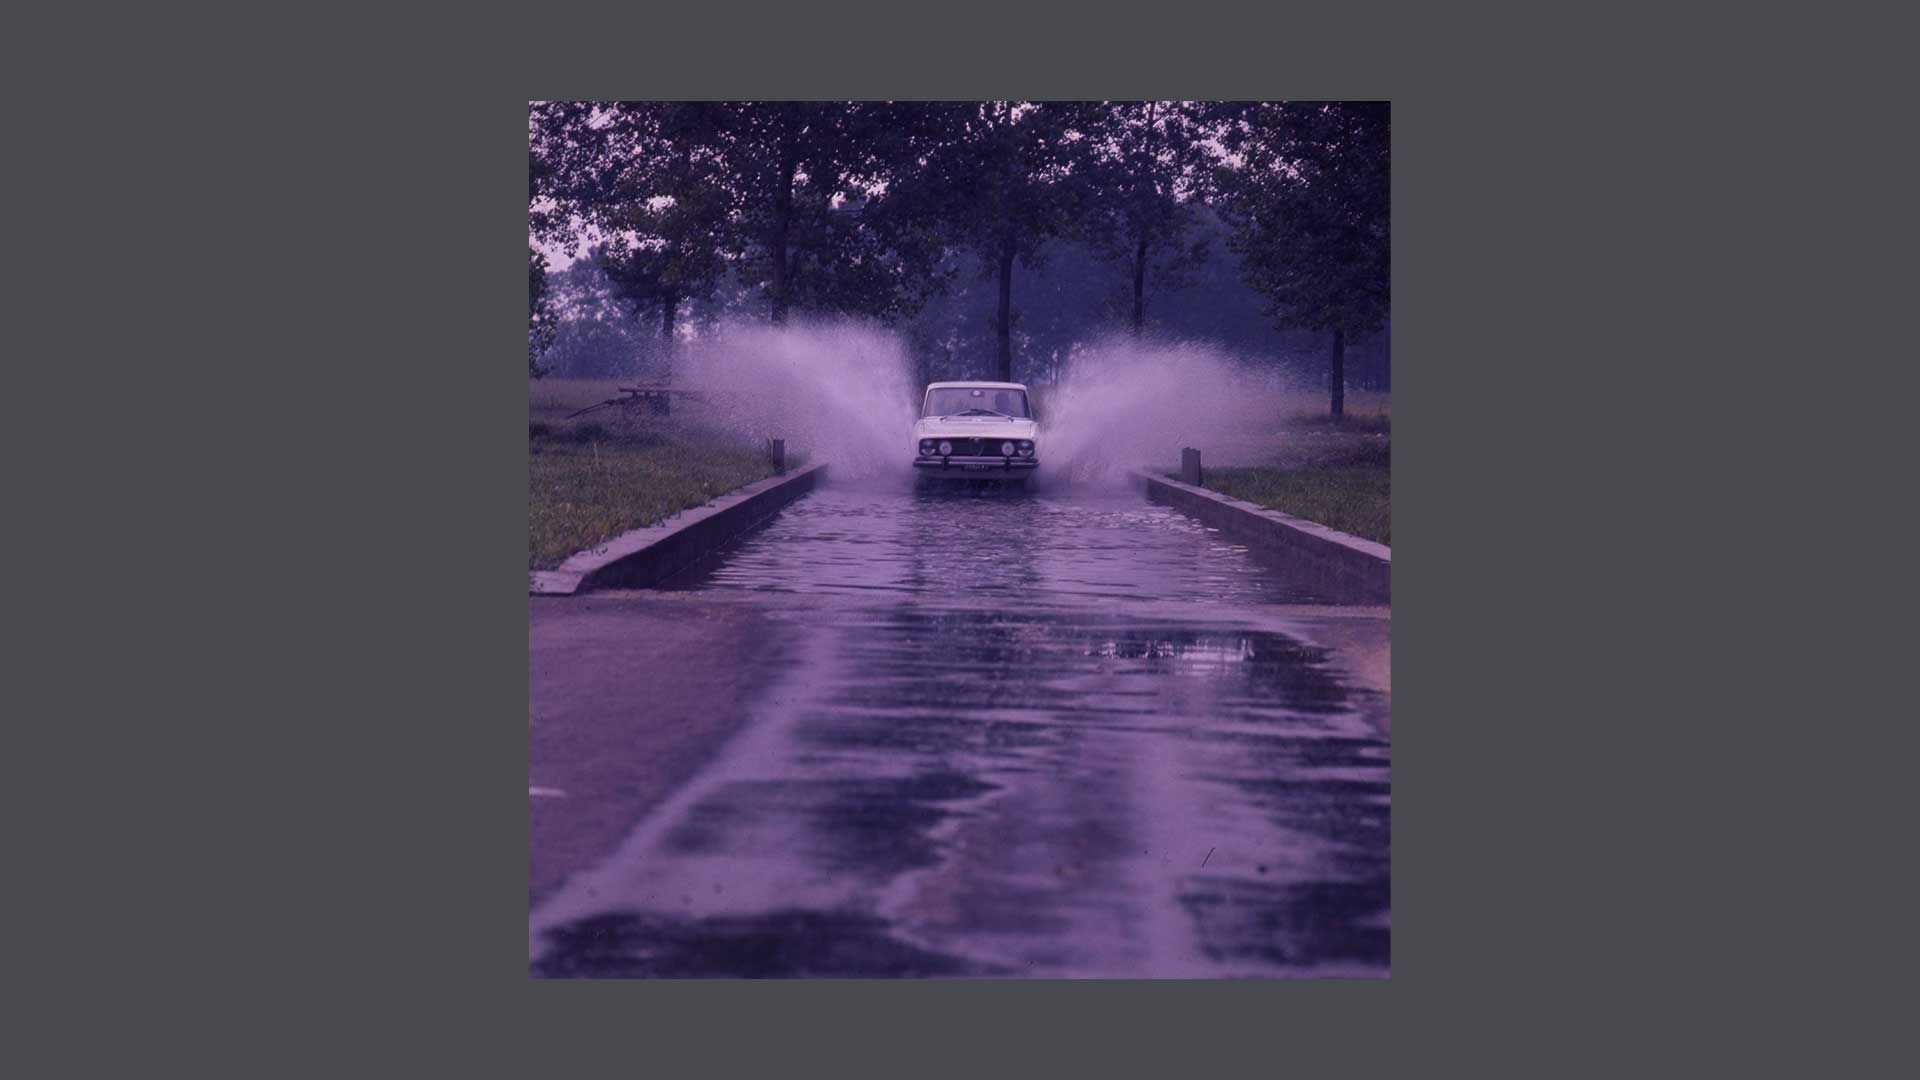 Historical photo of an automobile on wet ground